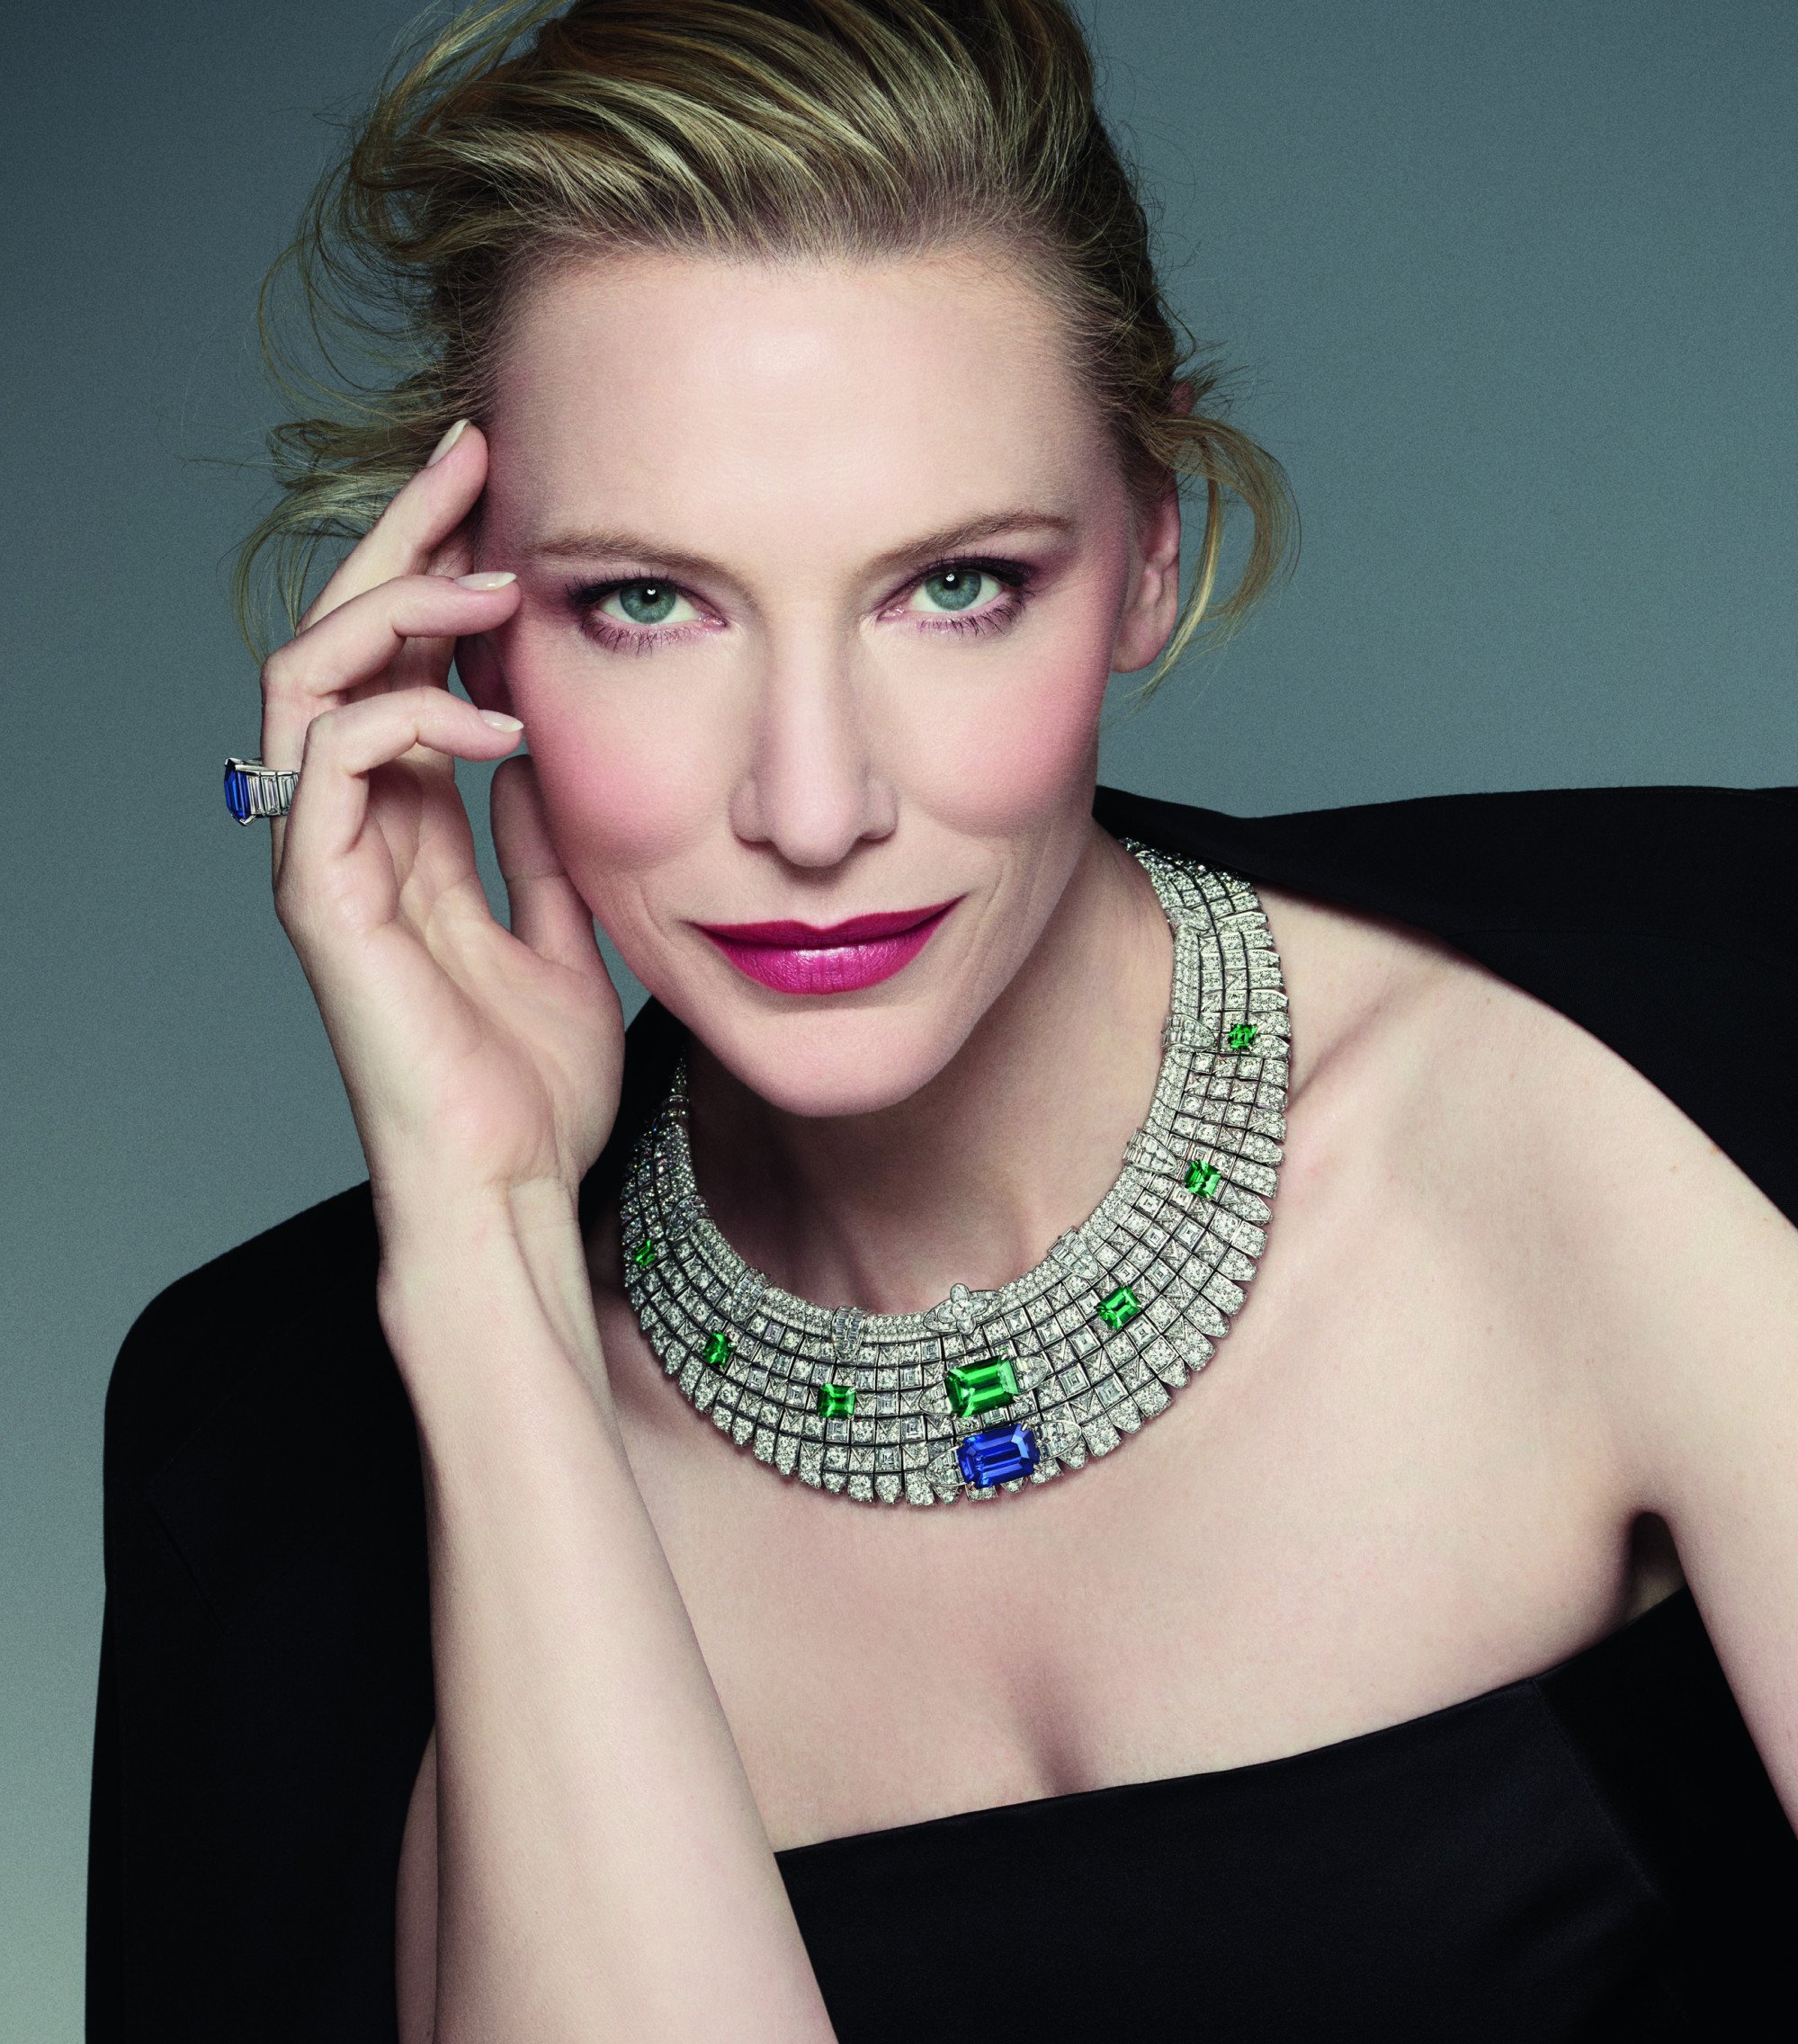 Louis Vuitton Celebrated Women in Their Latest High Jewellery